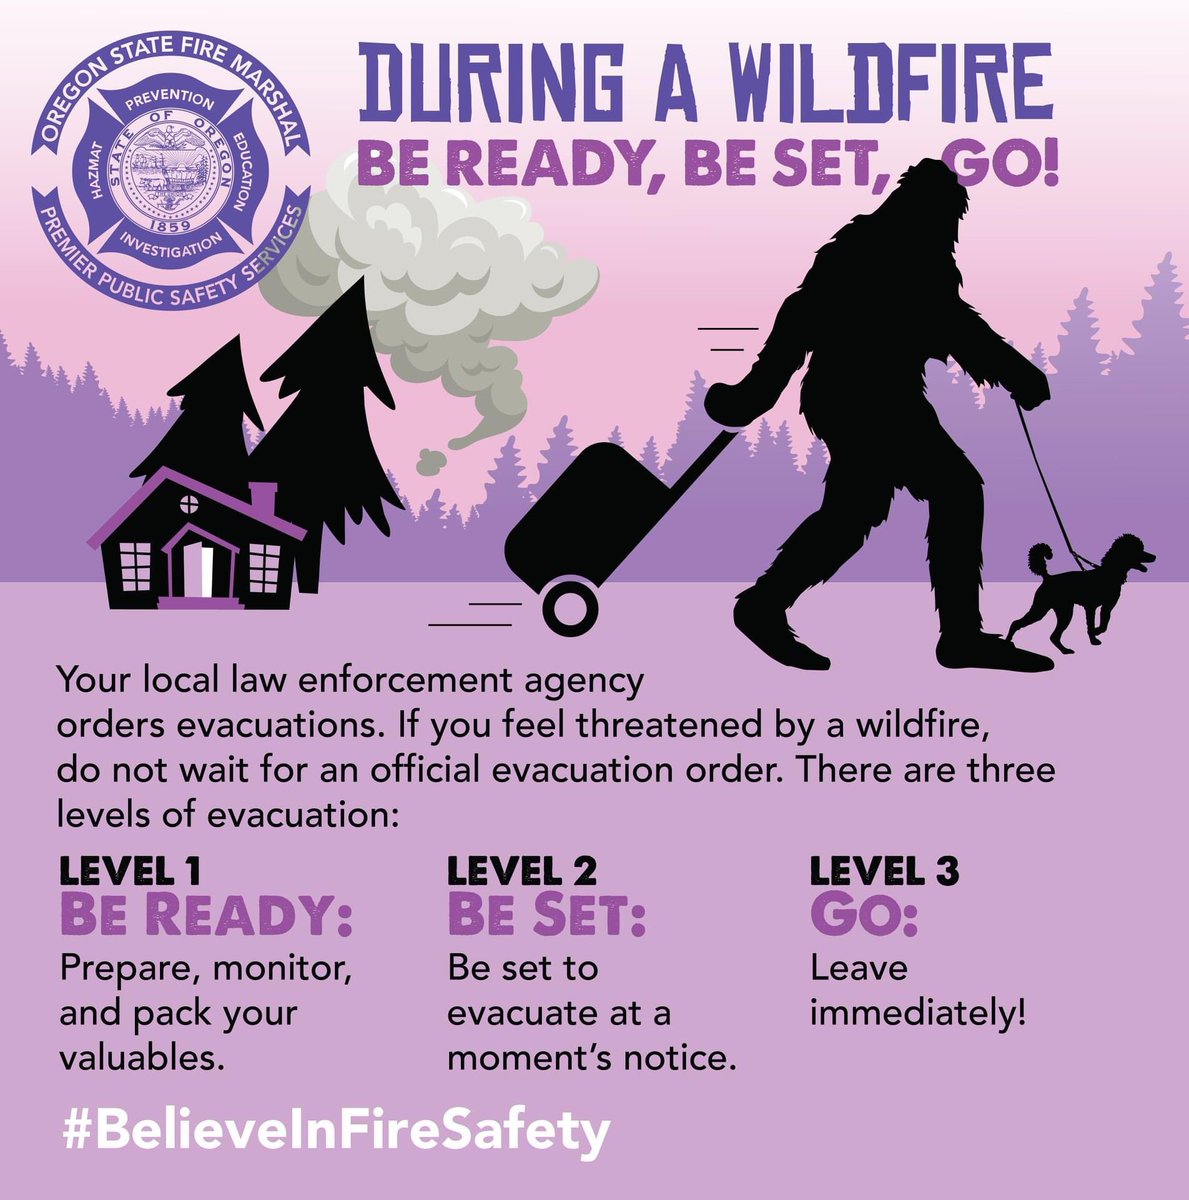 Be sure to closely monitor wildfire evacuation orders for your area and listen to local officials. A guide to understanding the evacuation levels can be found here and below.